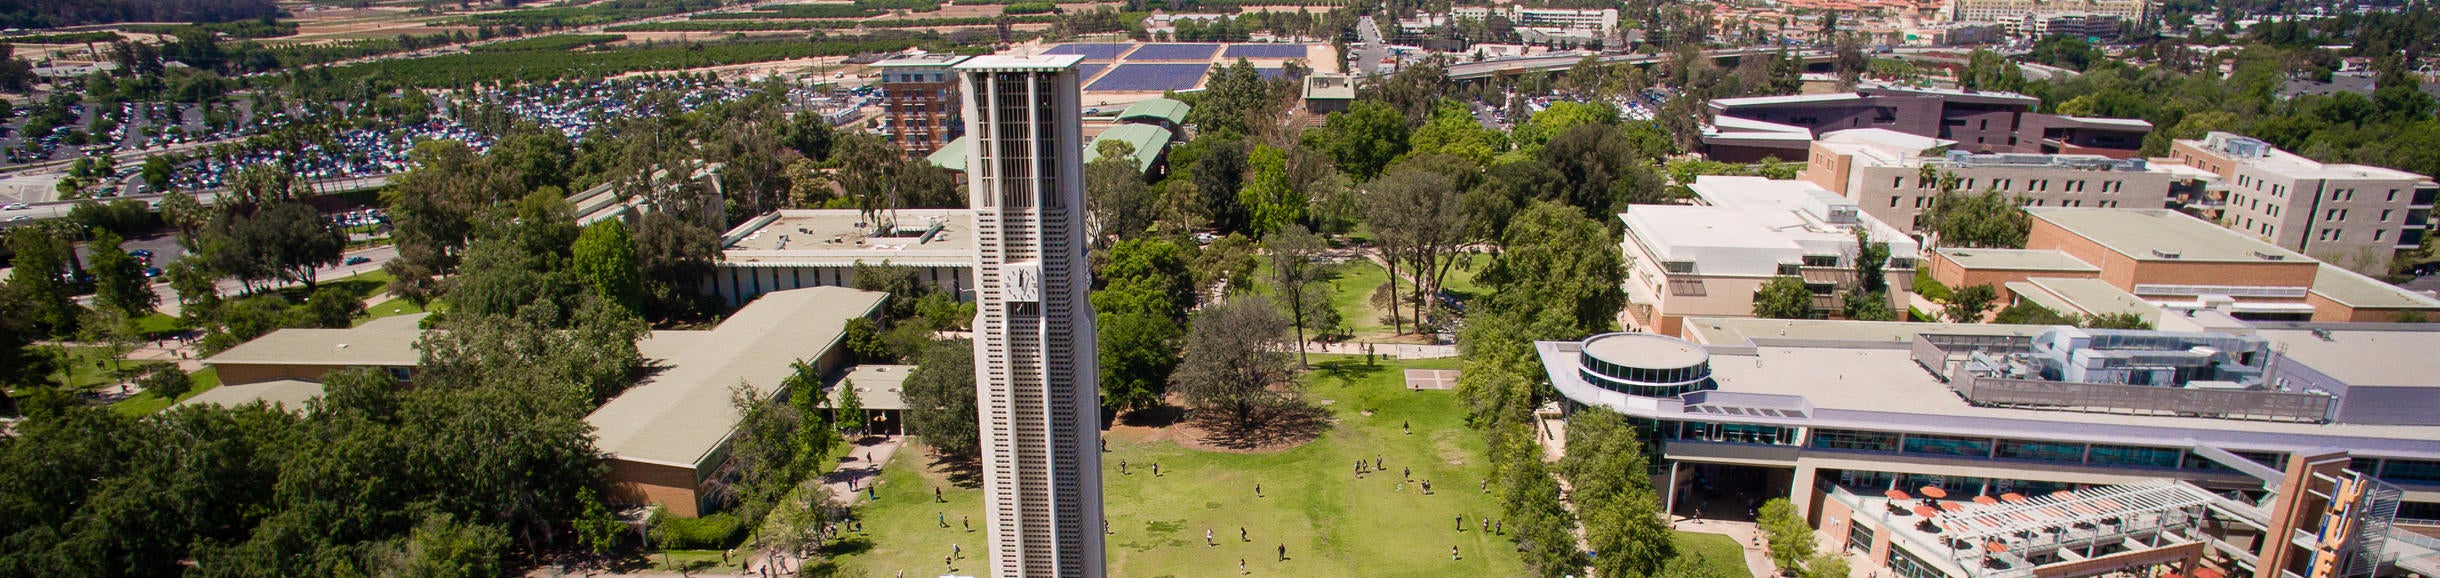 View of UCR from above with the Bell Tower in the center and blue skies